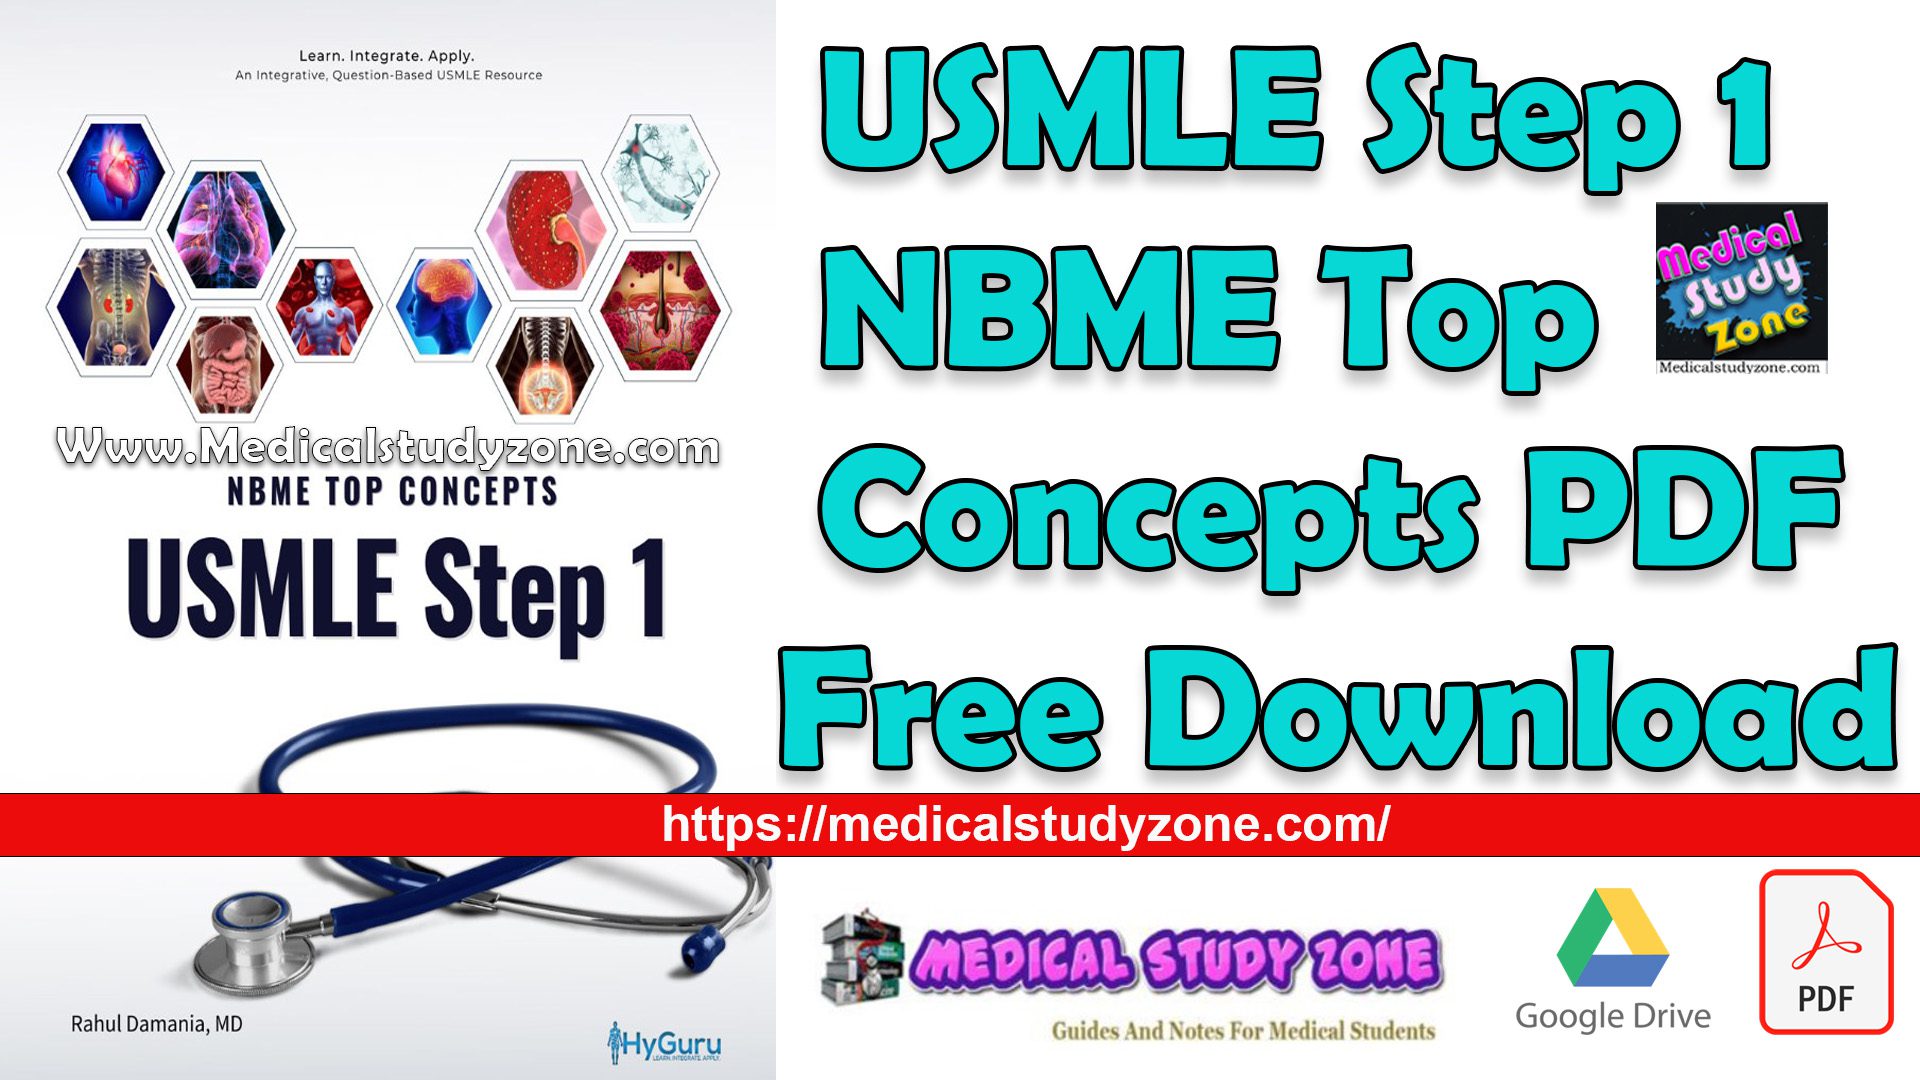 USMLE Step 1 NBME Top Concepts 2023 PDF Free Download Medical Study Zone